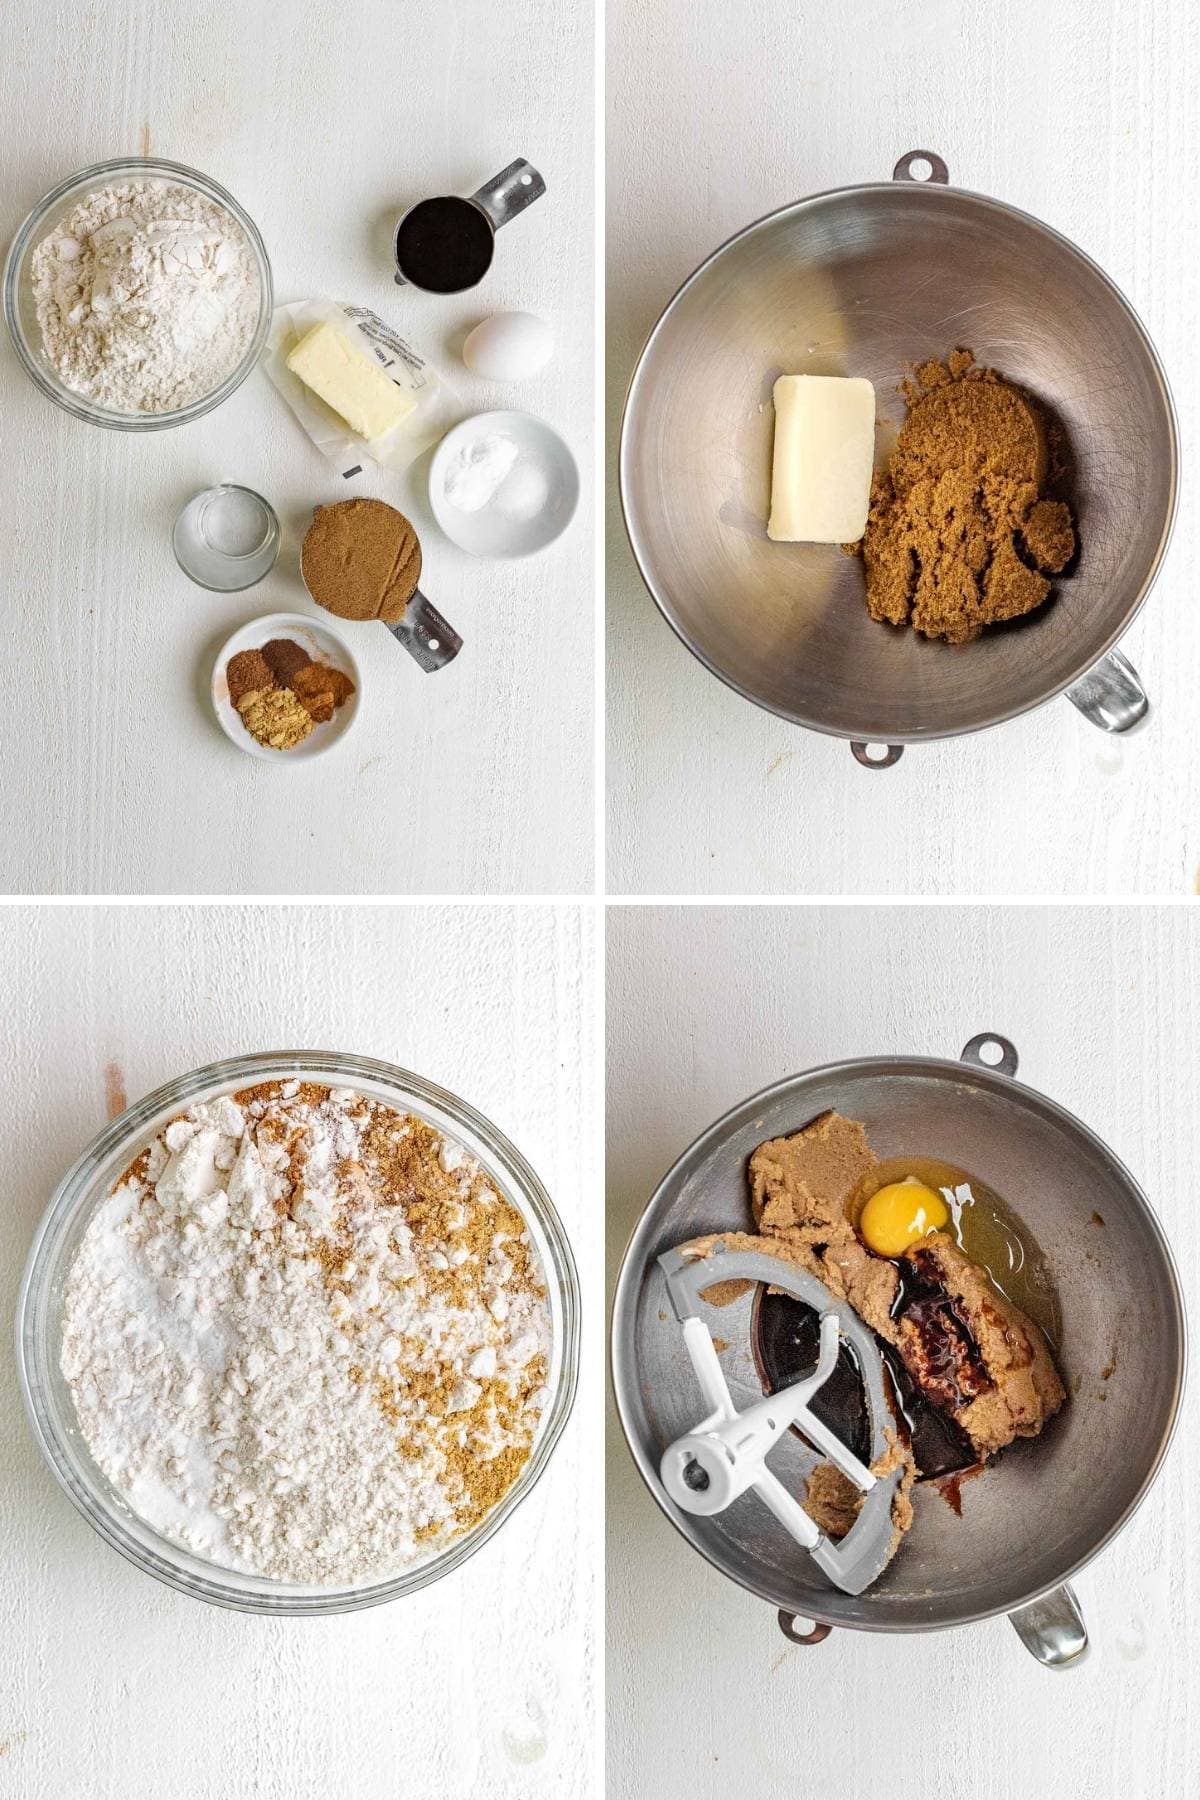 Collage of pictures showing ingredients and mixing steps for recipe.